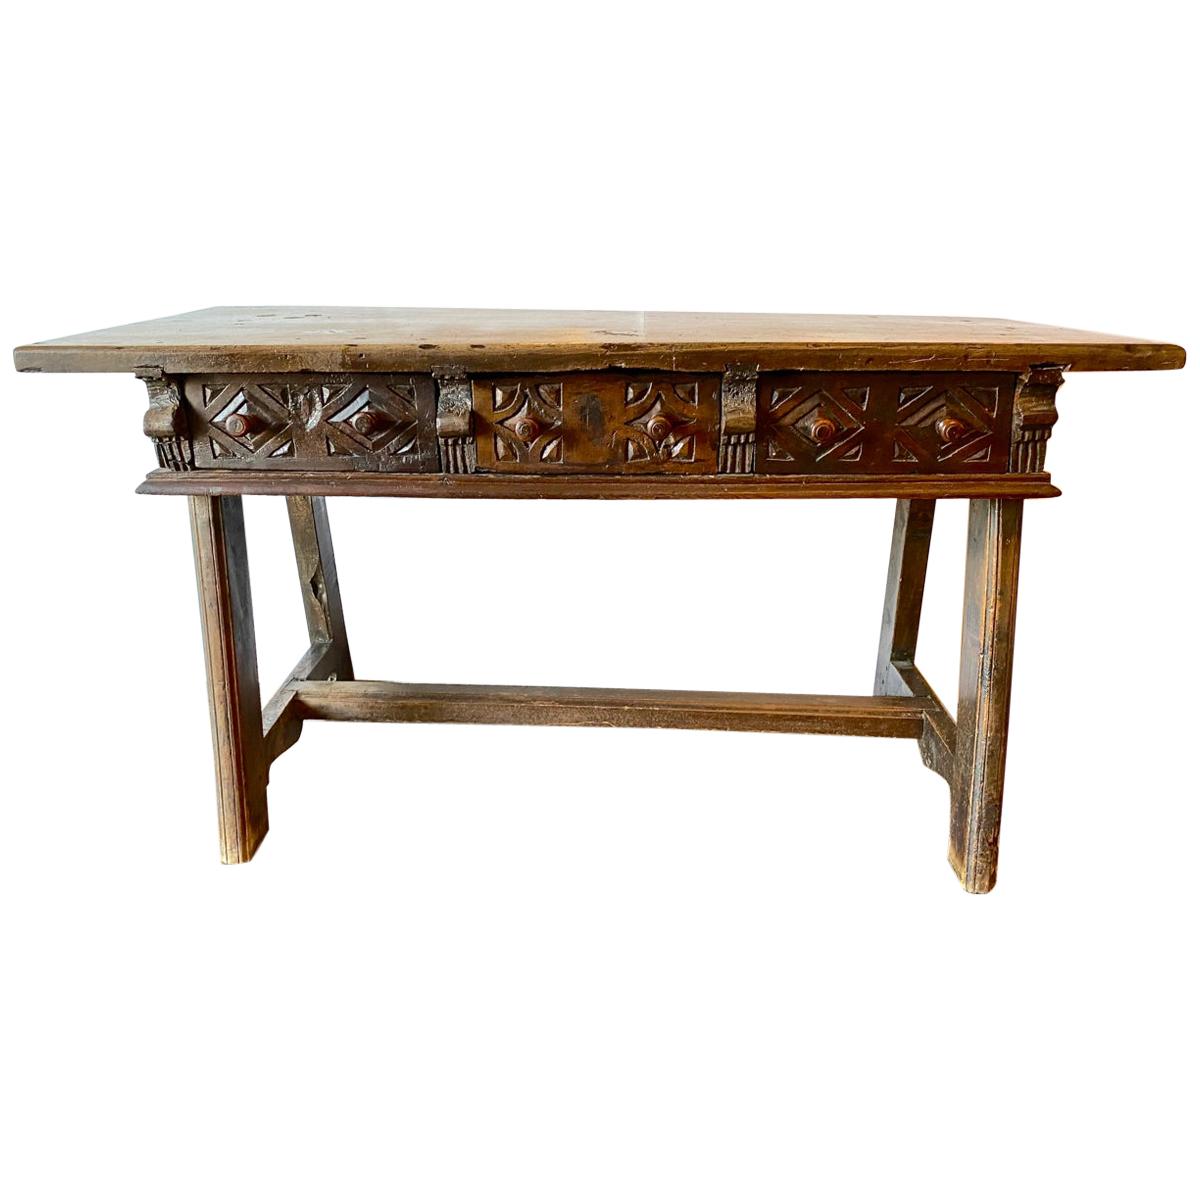 Spanish Colonial Writing Table/Console, circa 18th-19th Century